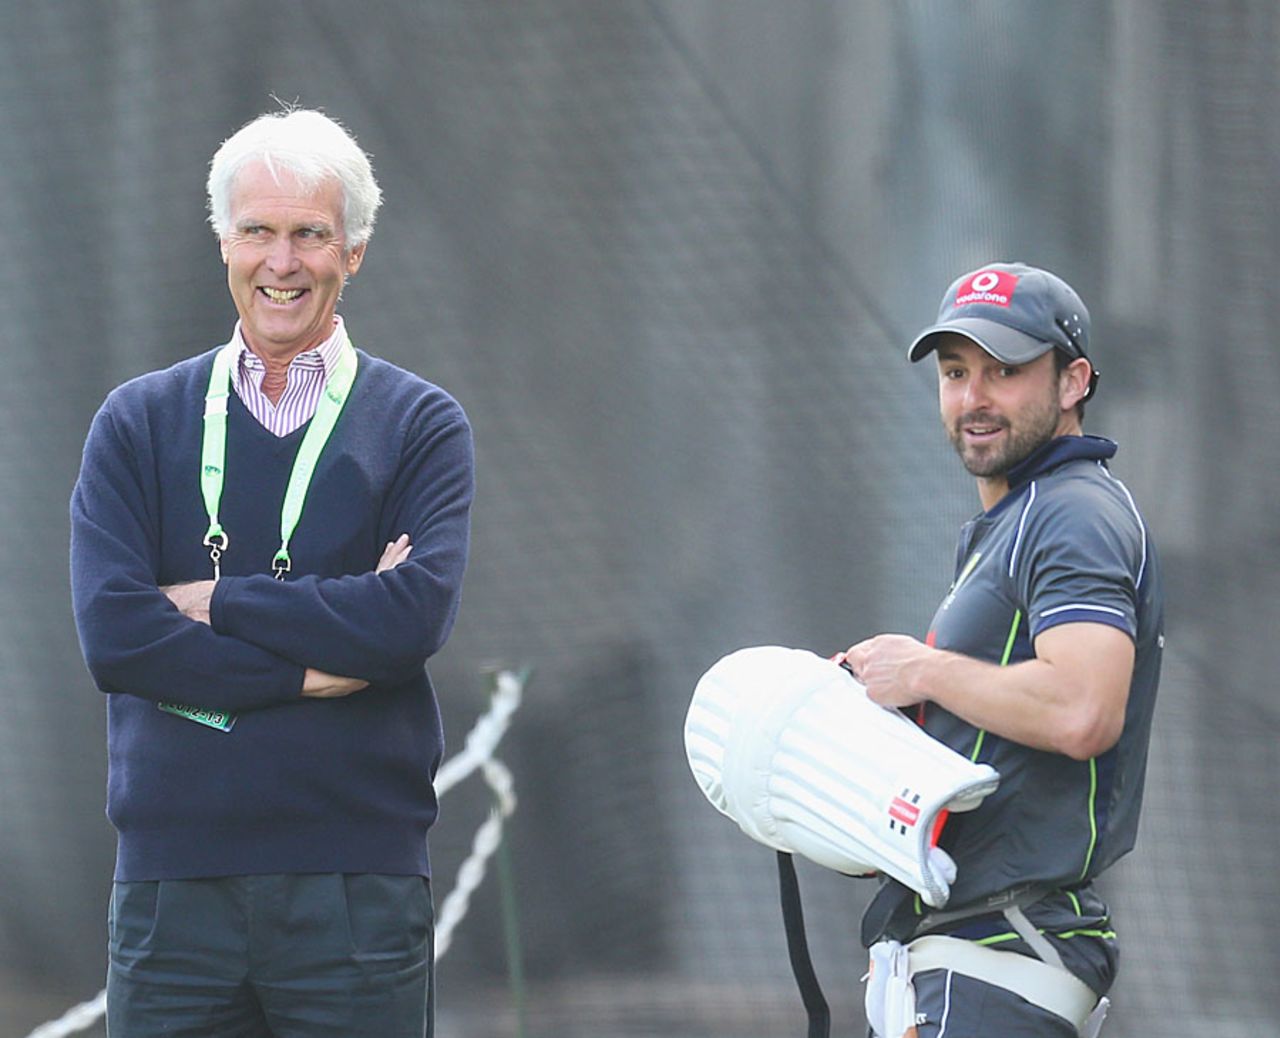 John Inverarity and Ed Cowan chat at practice, Melbourne, December 25, 2012